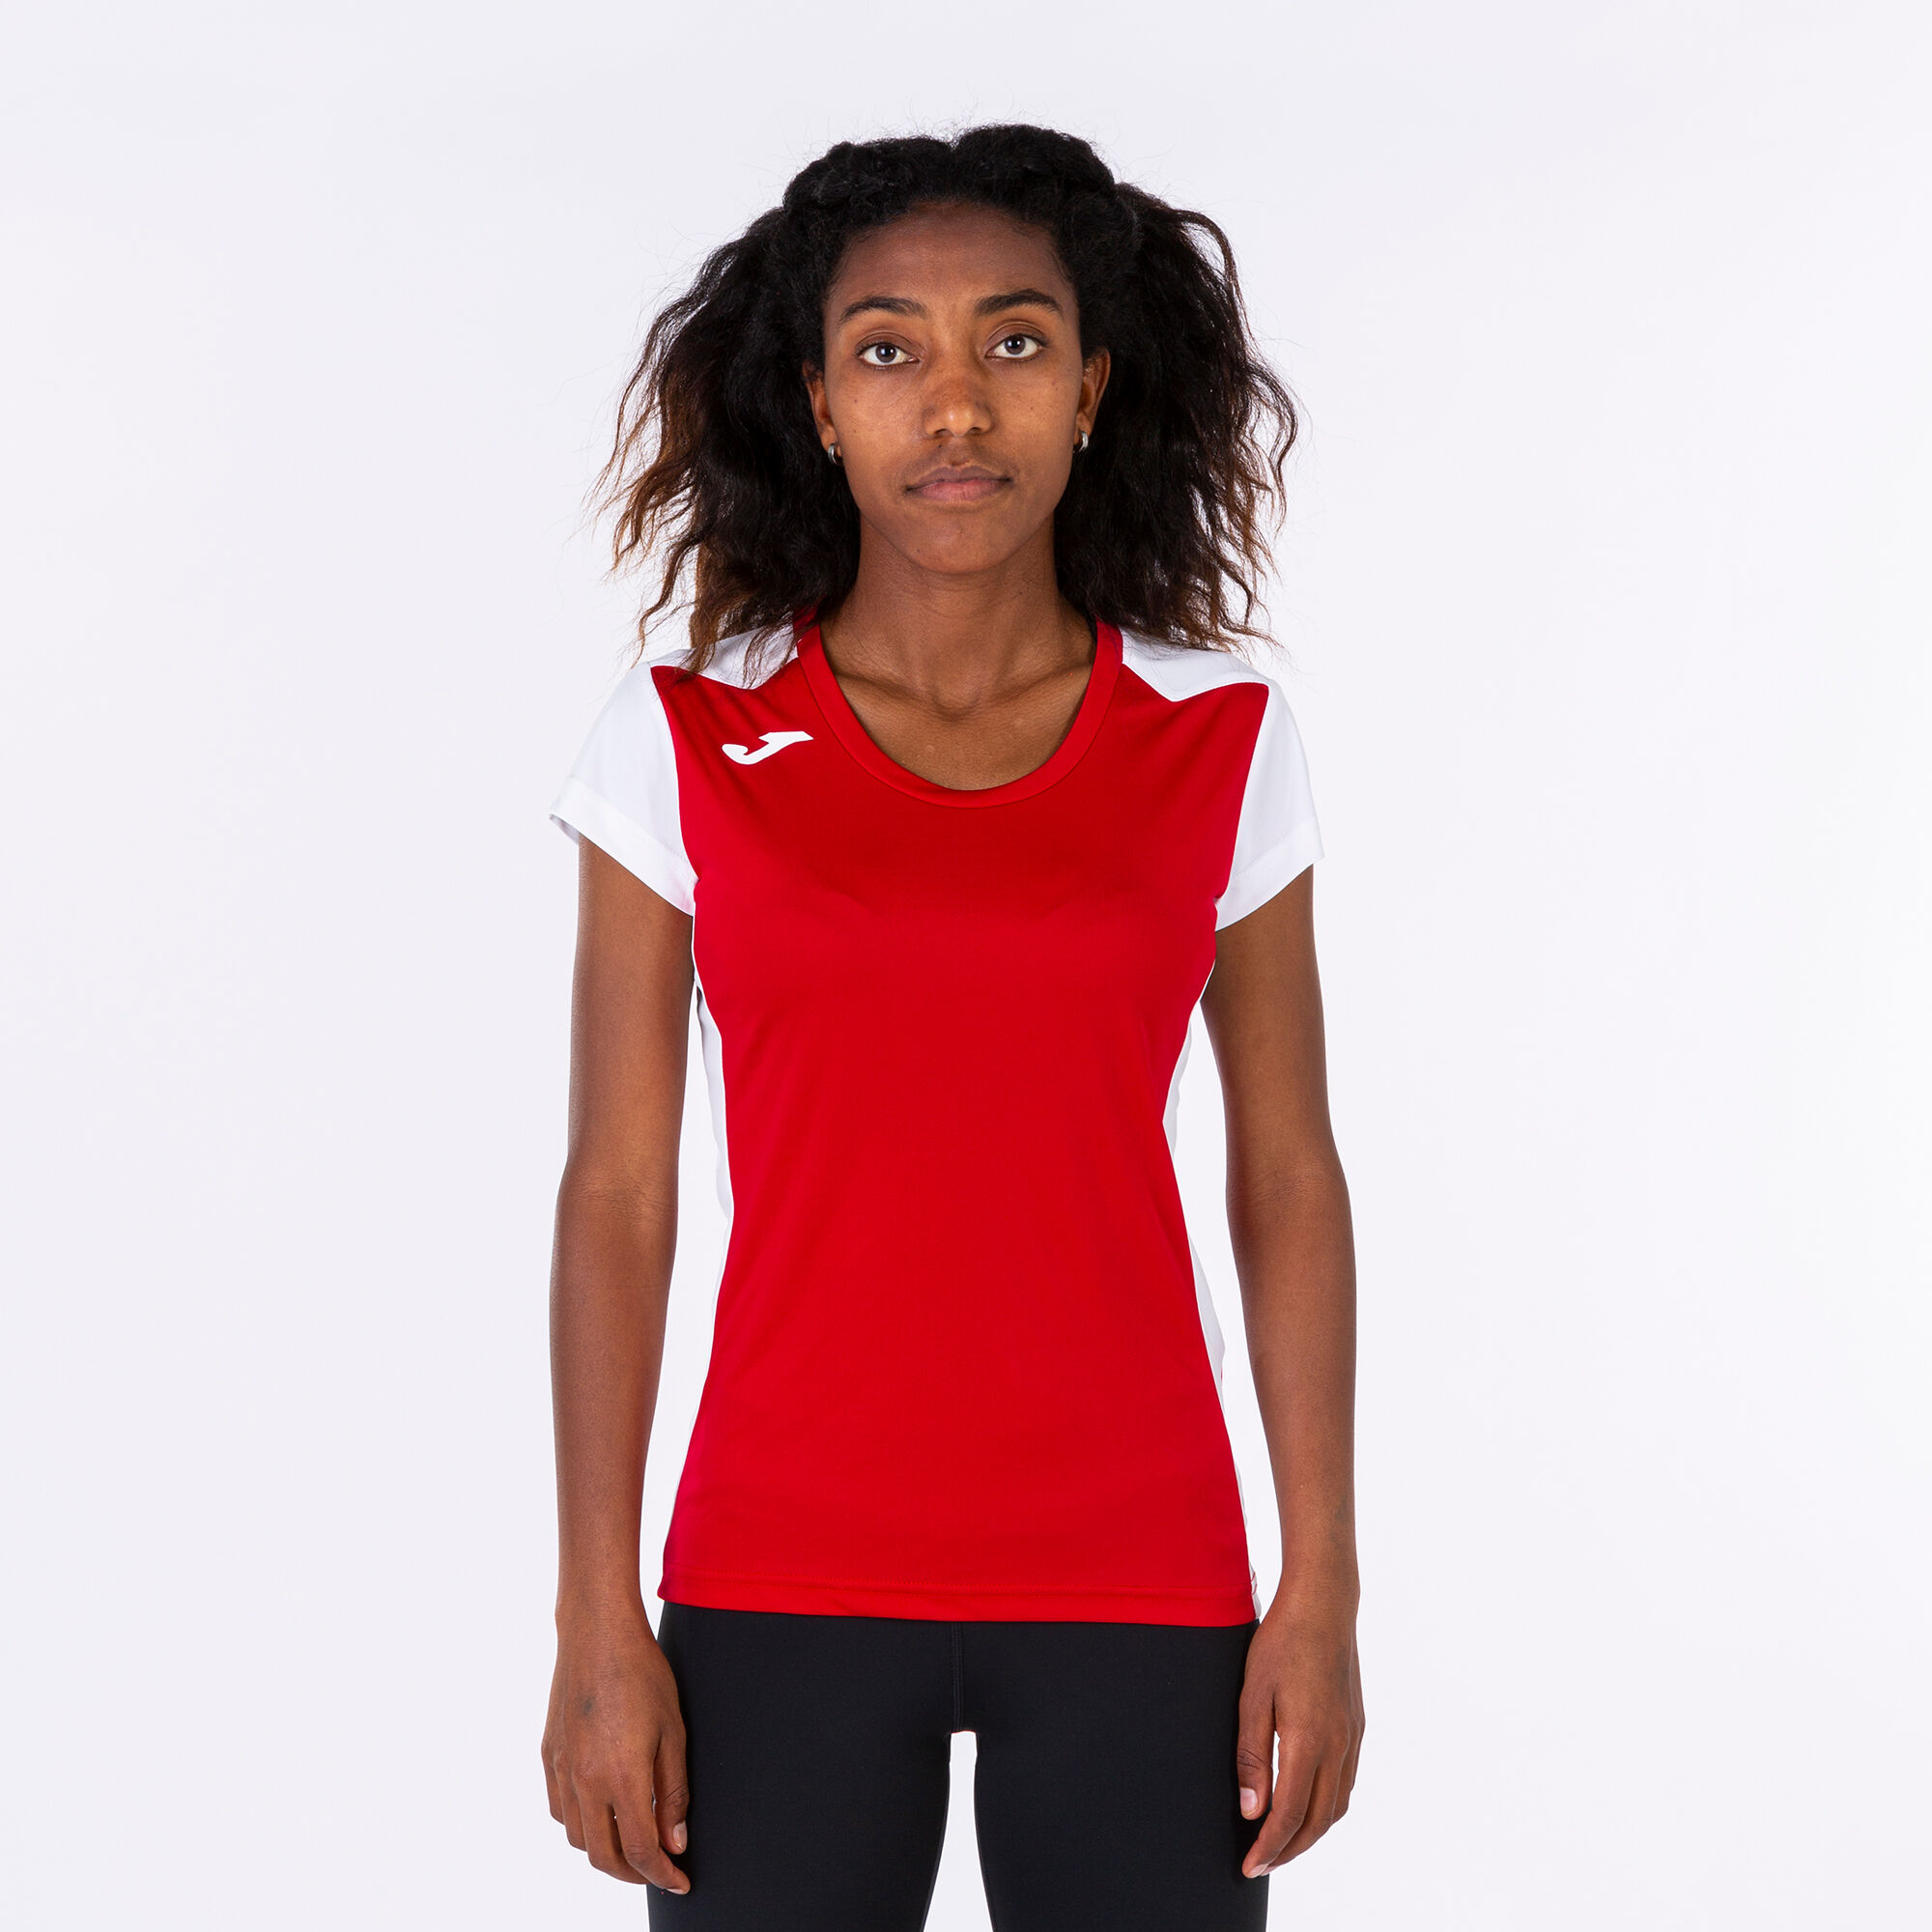 Maillot manches courtes femme Record II rouge blanc